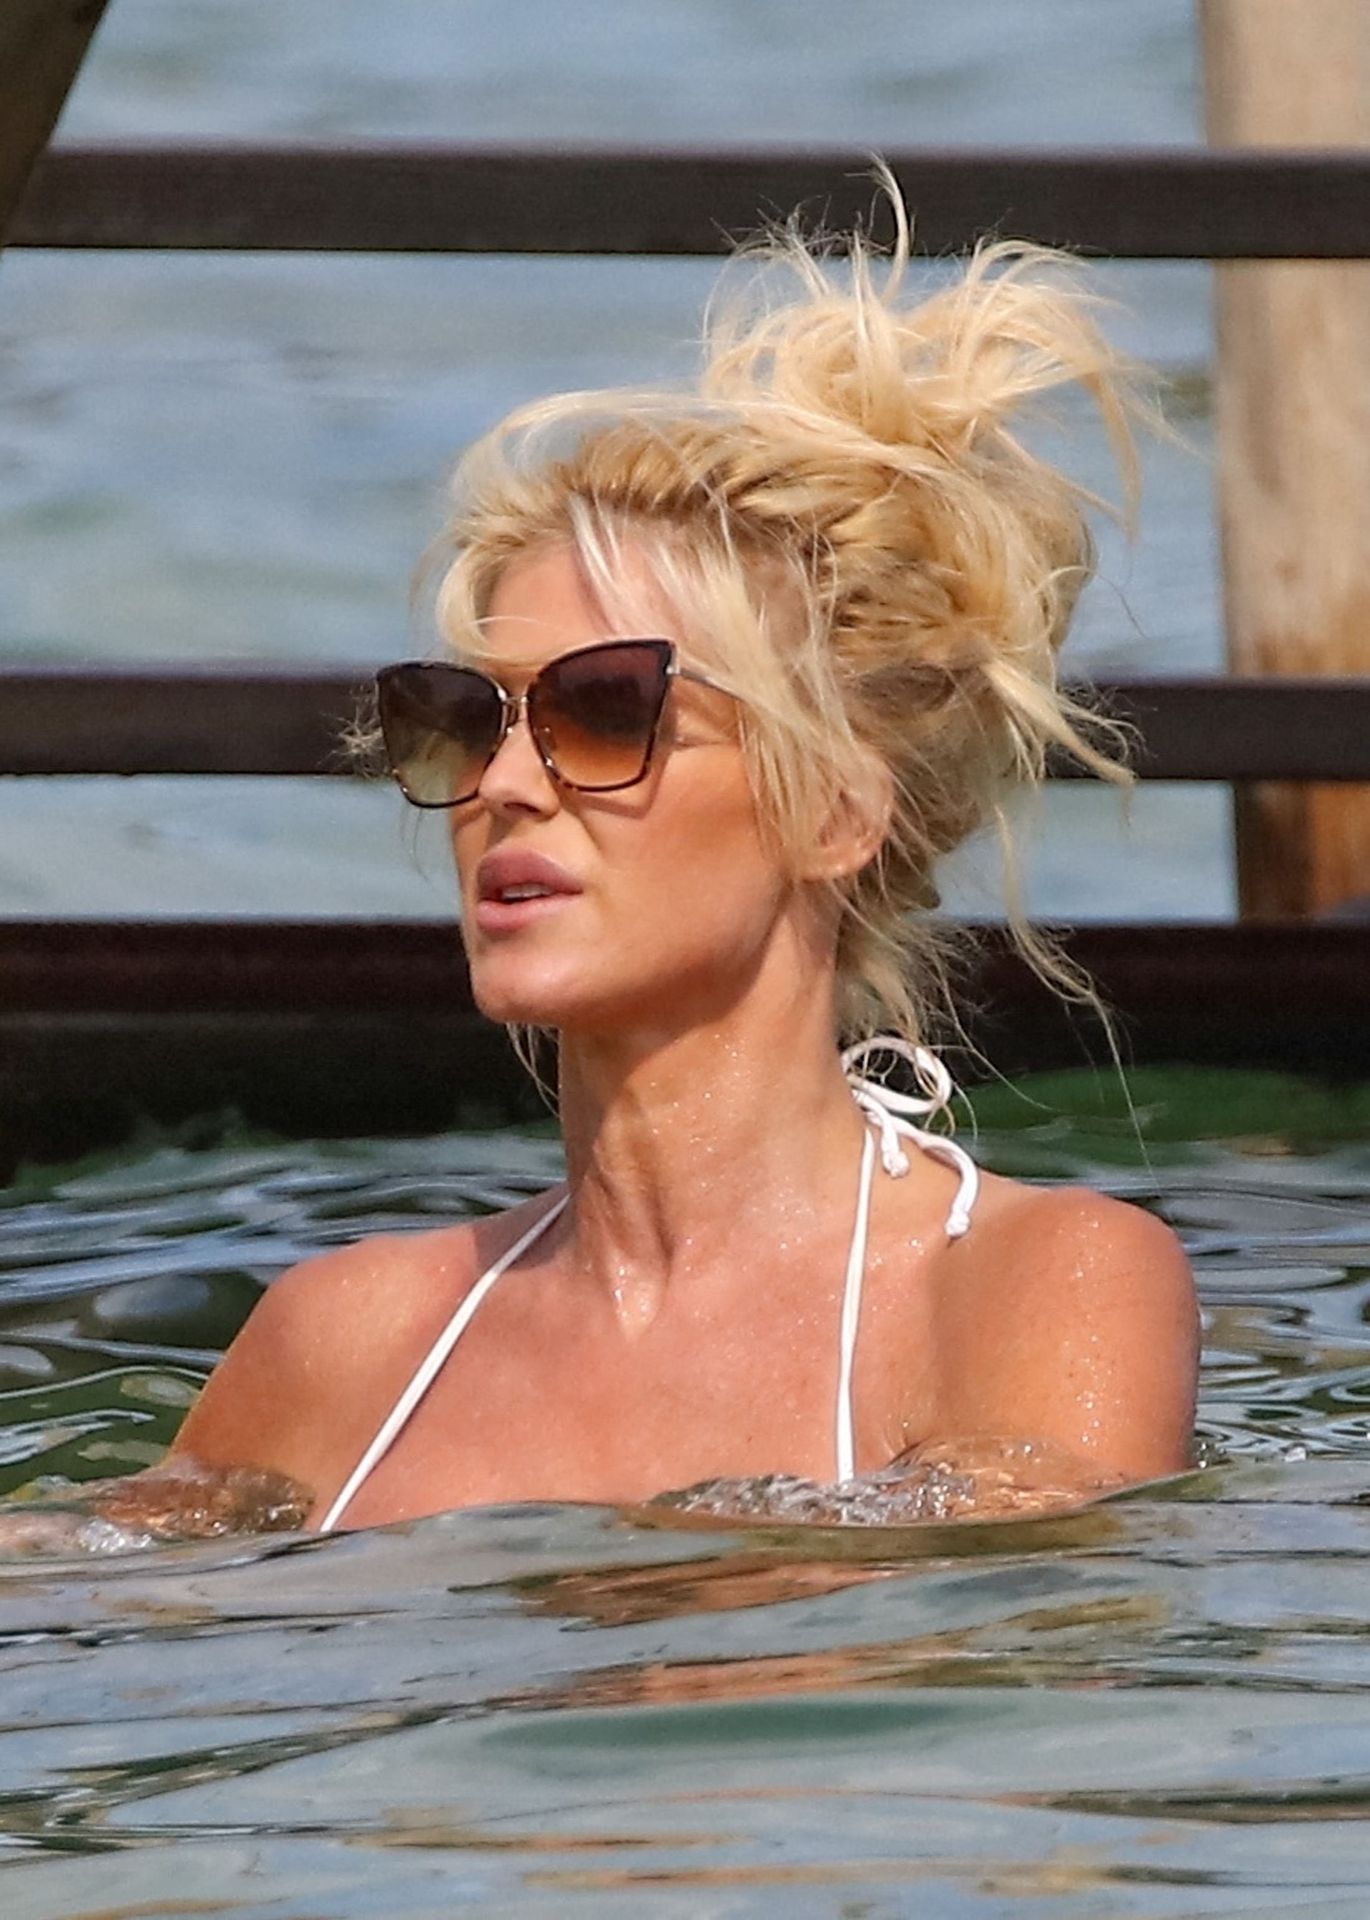 Victoria Silvstedt Shows Off Her Sexy Body at the Beach in St Tropez (53 Photos)